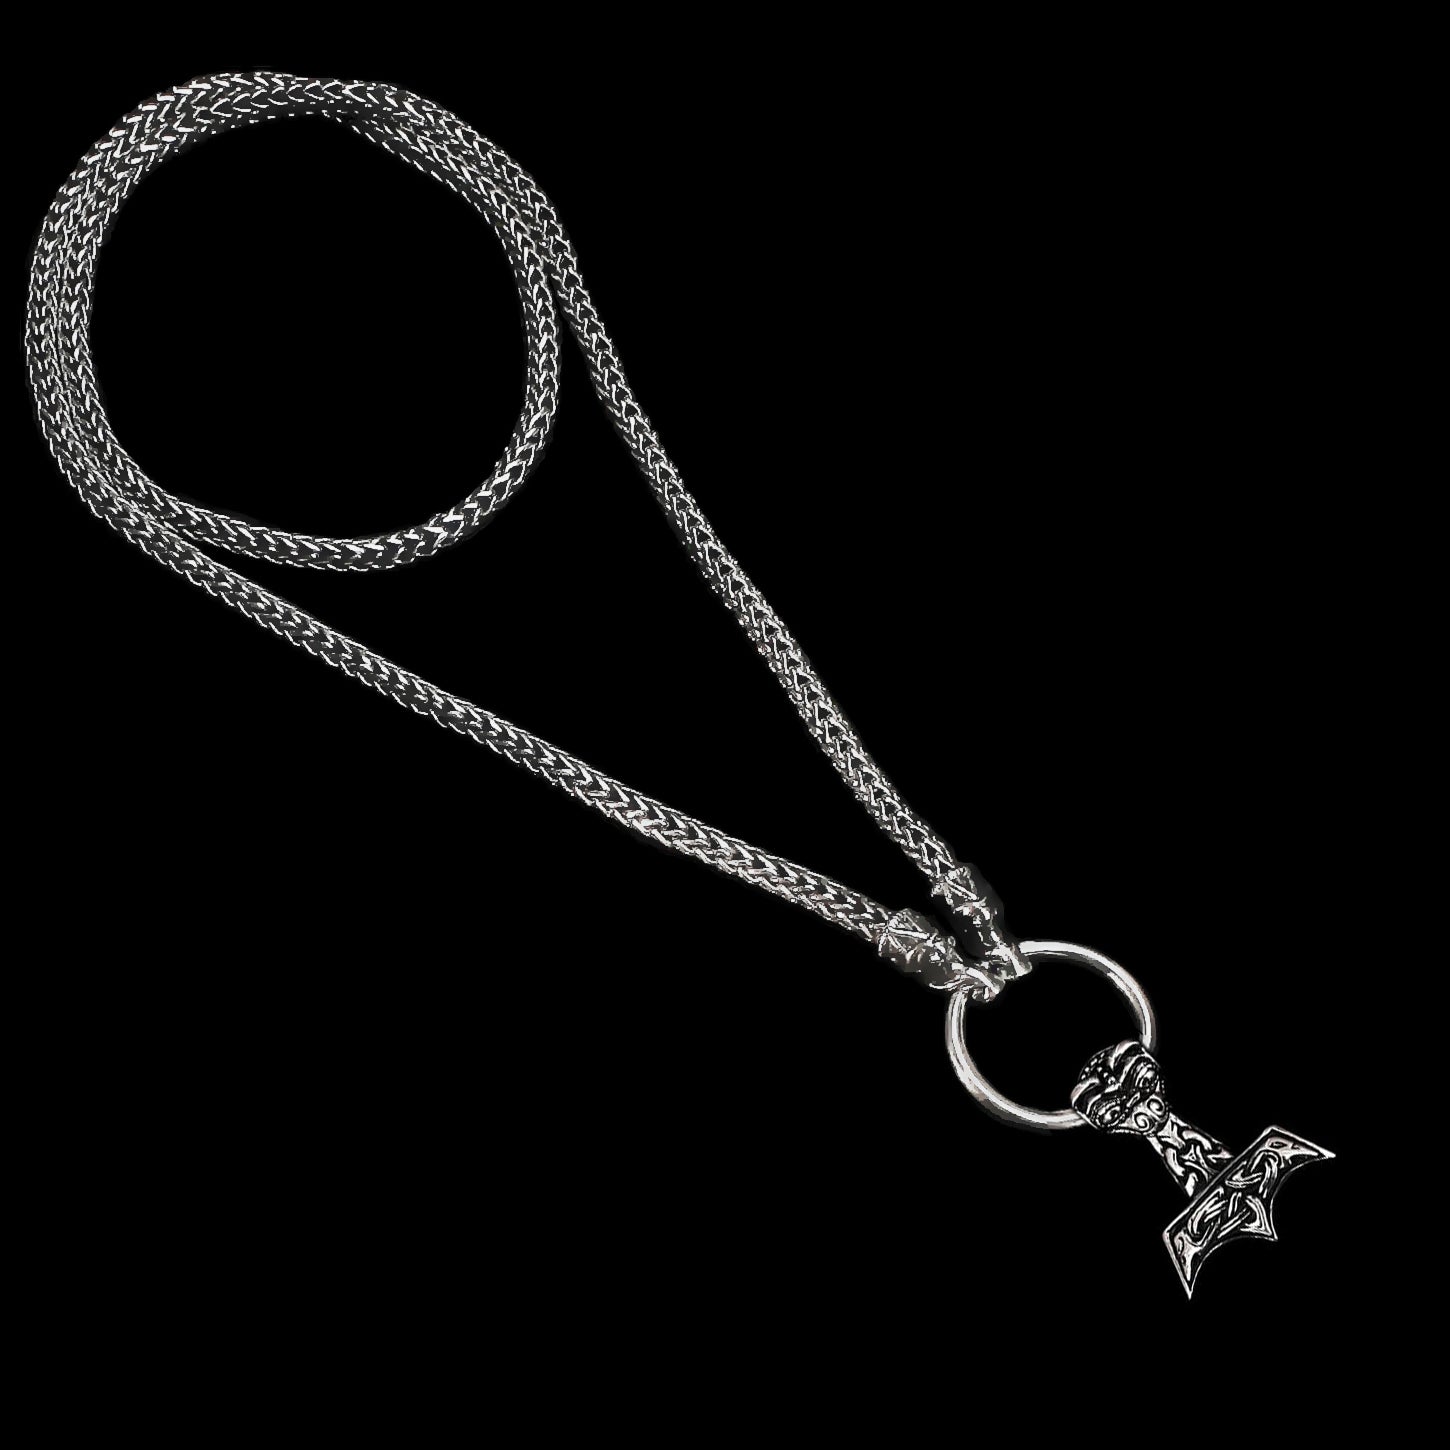 Silver Thor's Hammer Necklace with Gotlandic Dragon Heads - Small & Ferocious Silver Thor's Hammer